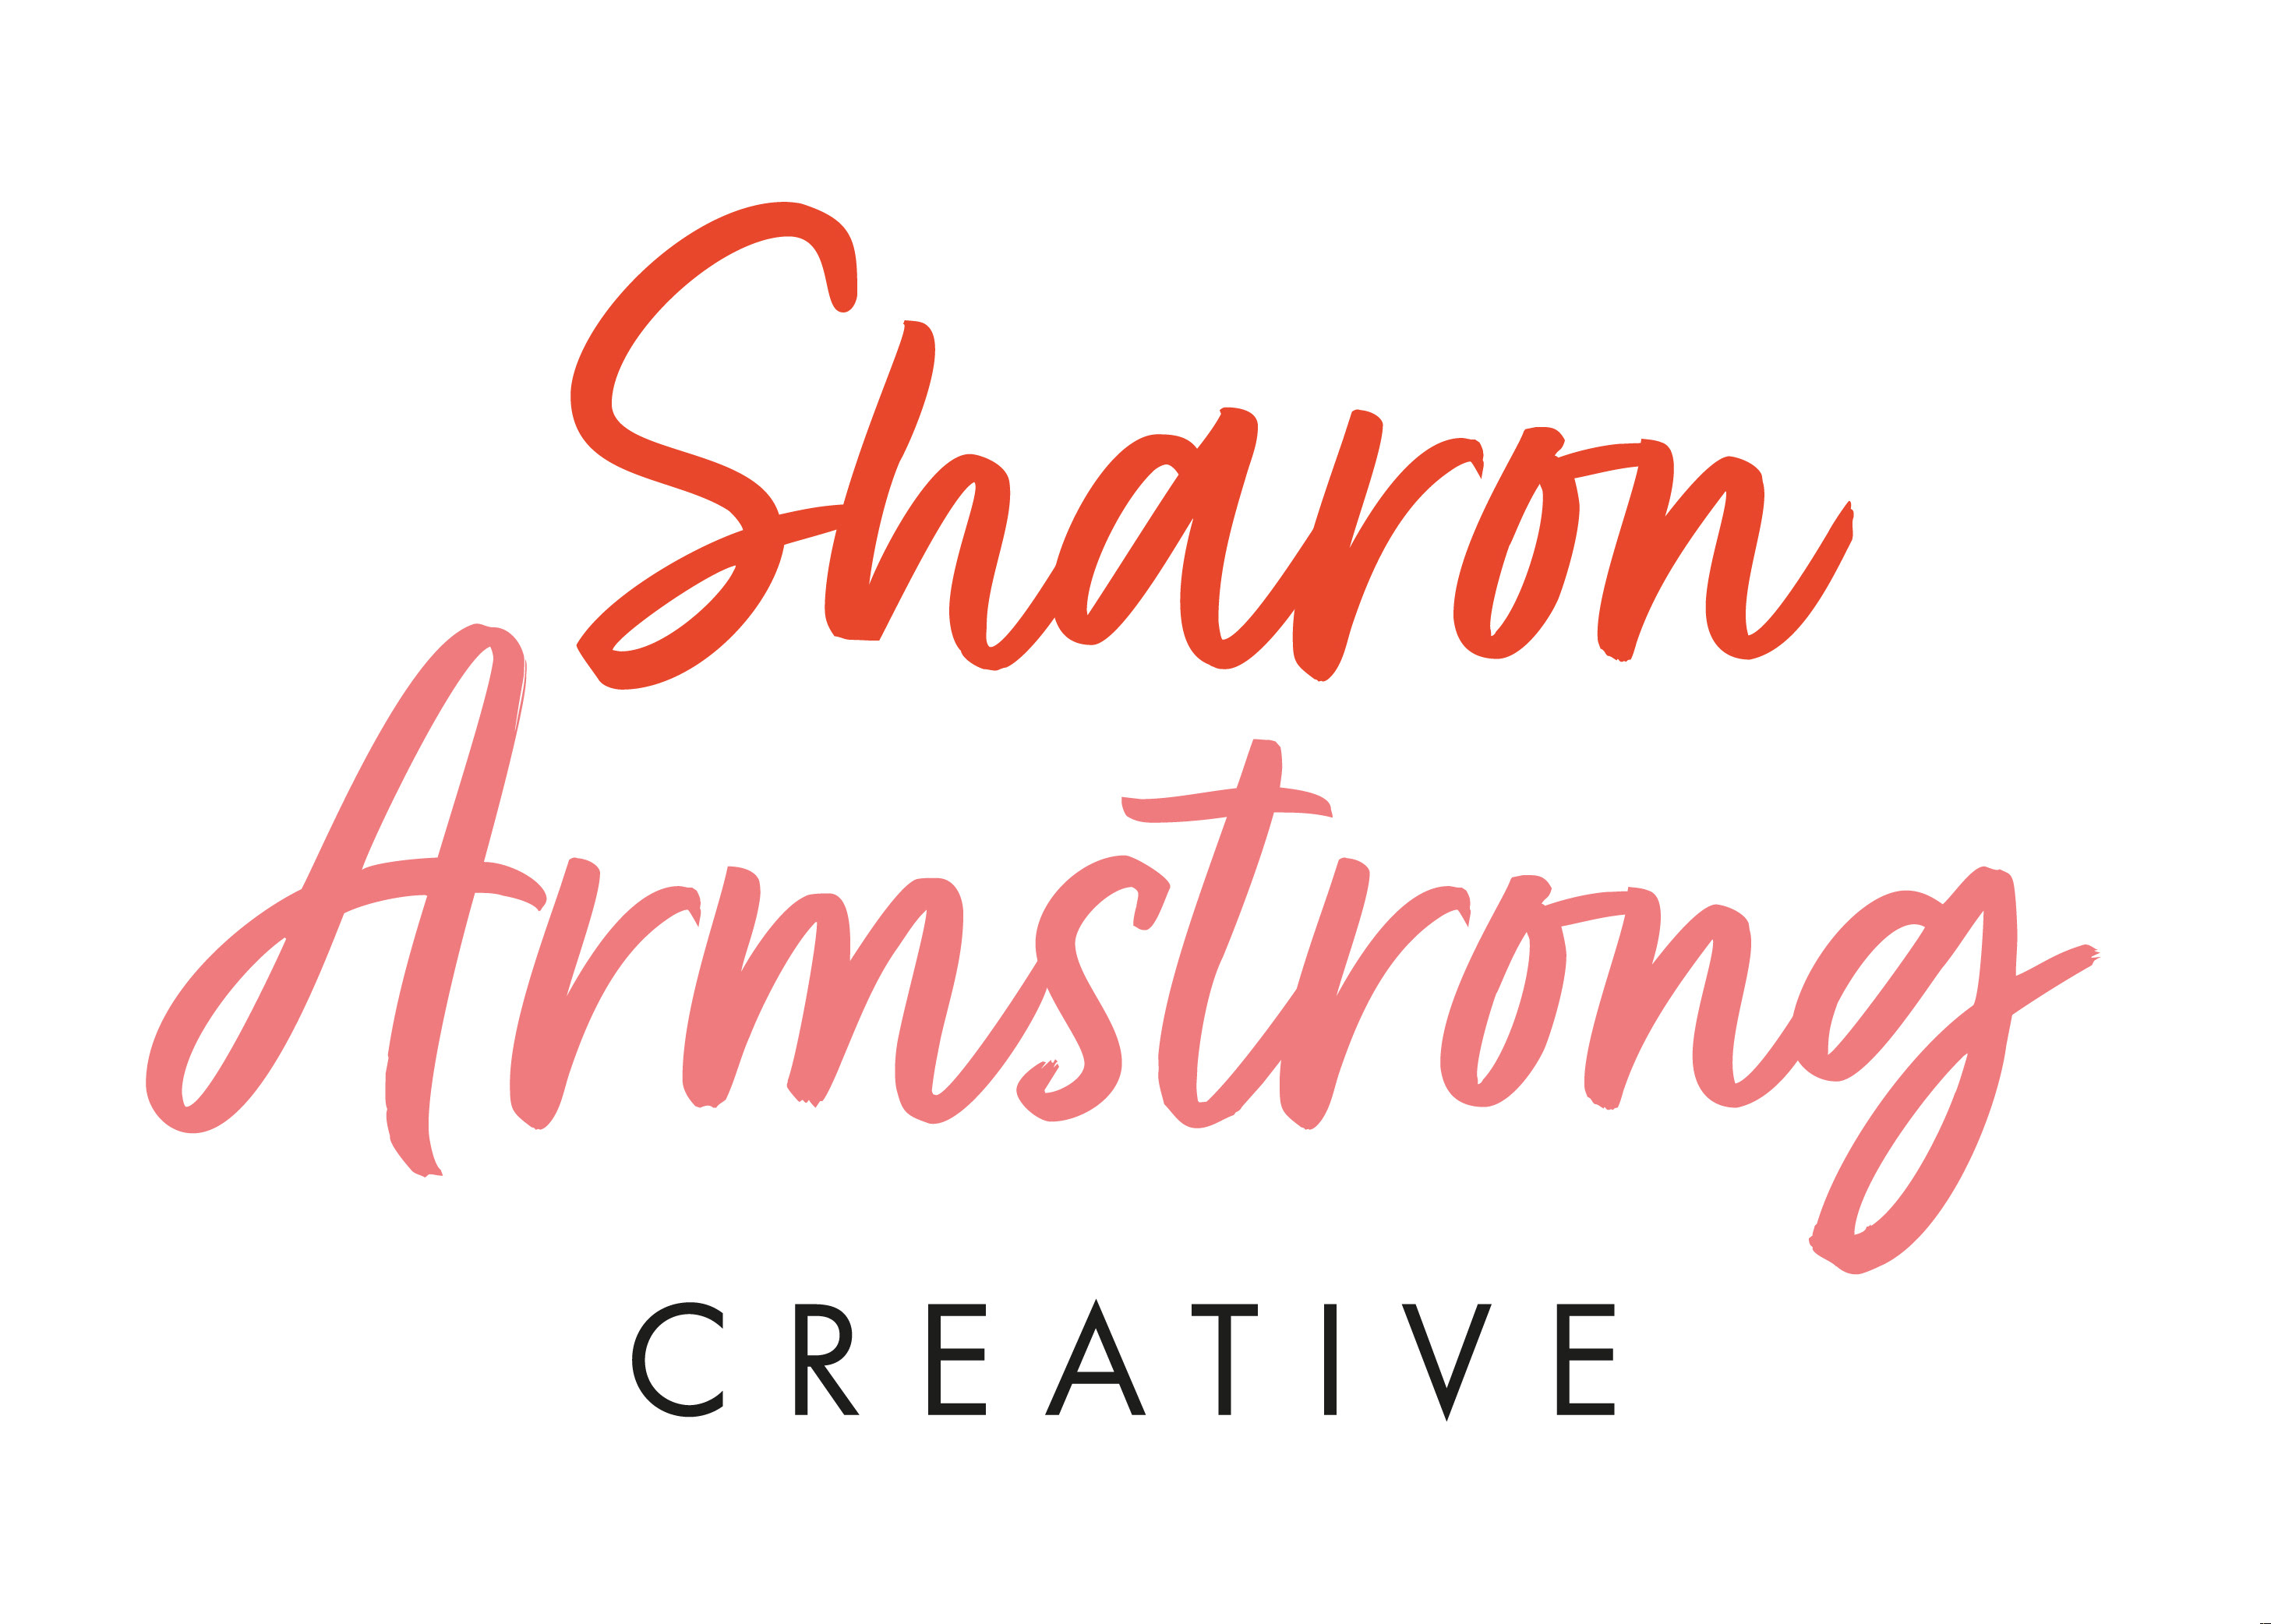 Logo for Sharon Armstrong Creative a Freelance Graphic Designer and Illustrator